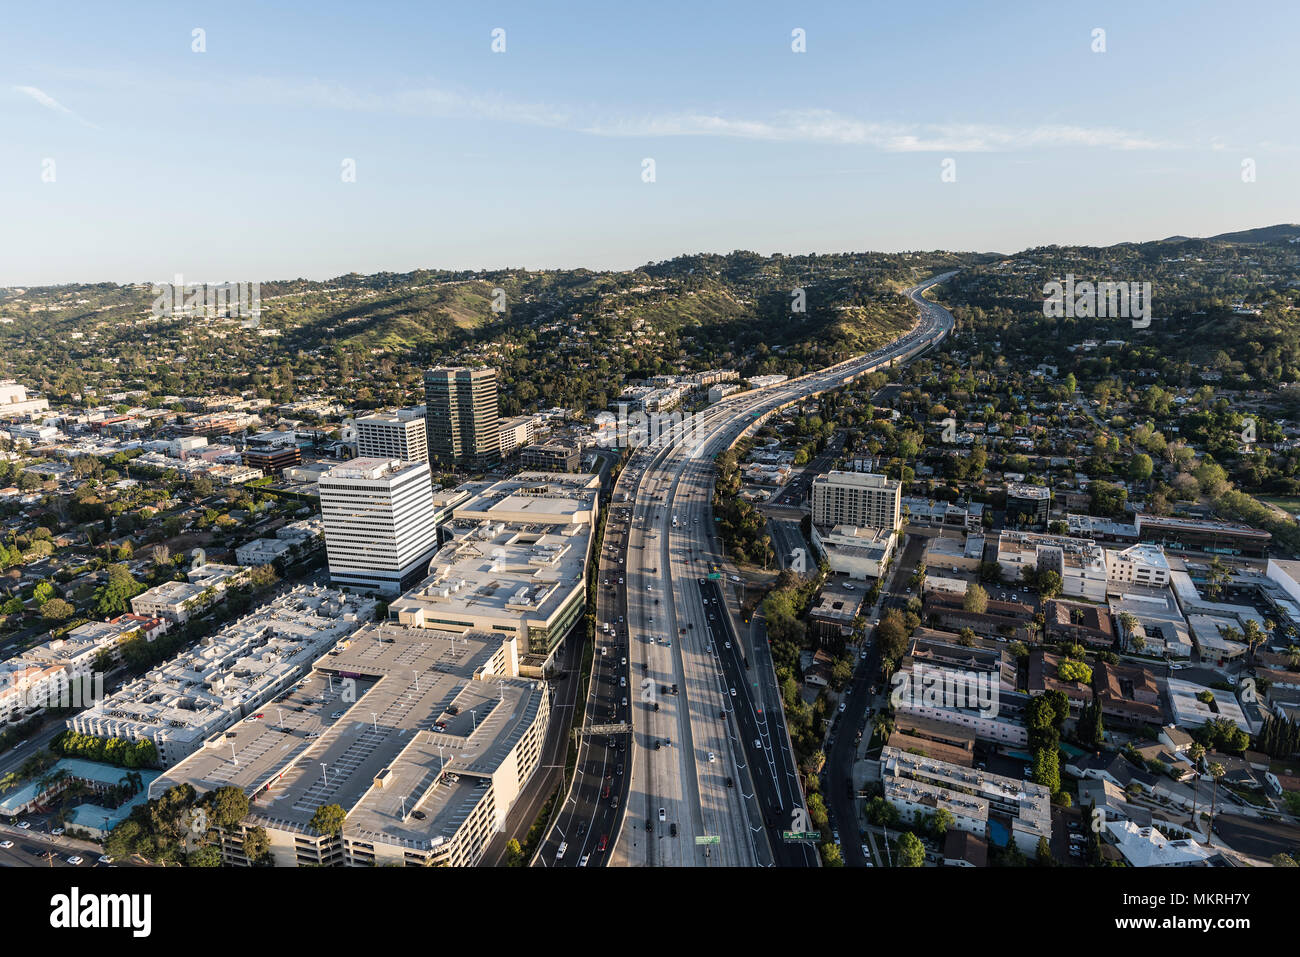 Late afternoon aerial view of San Diego 405 Freeway near Ventura Blvd in the San Fernando Valley area of Los Angeles, California. Stock Photo